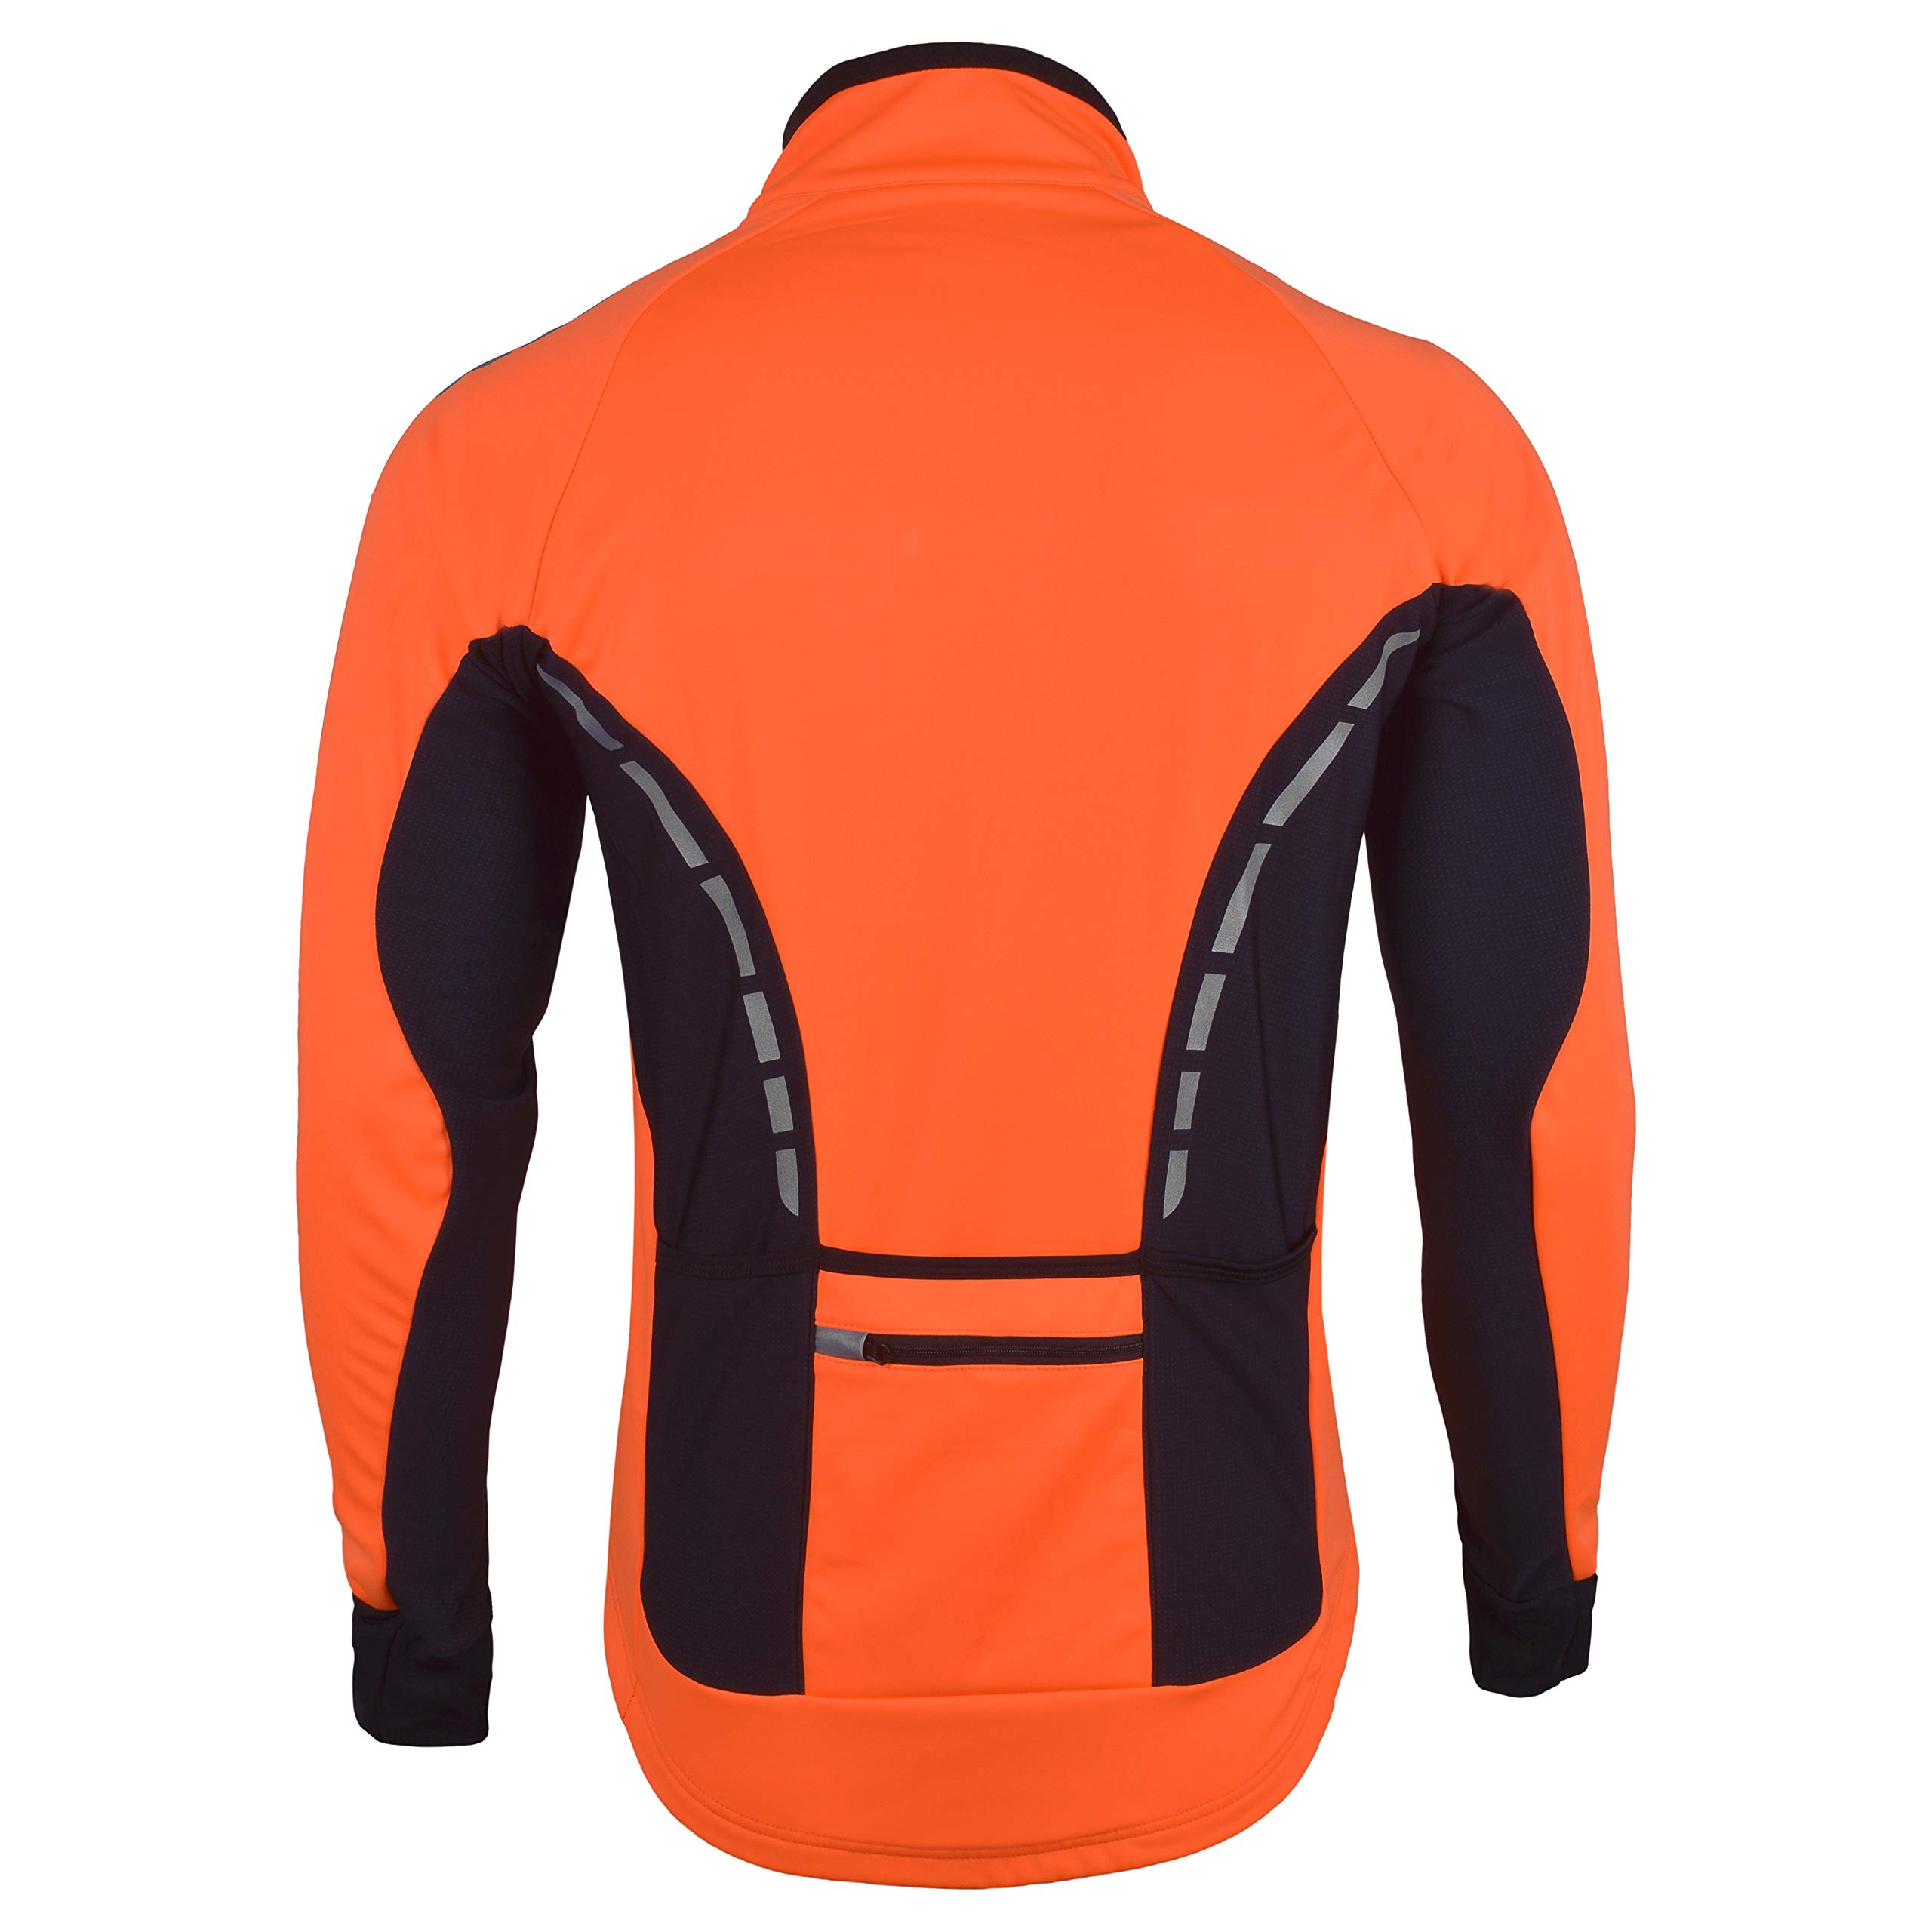 Zimco Pro Men Winter Cycling Jackets High Viz Bicycle Jersey Windproof Thermal Insulated Jacket (2XL, Tangerine)